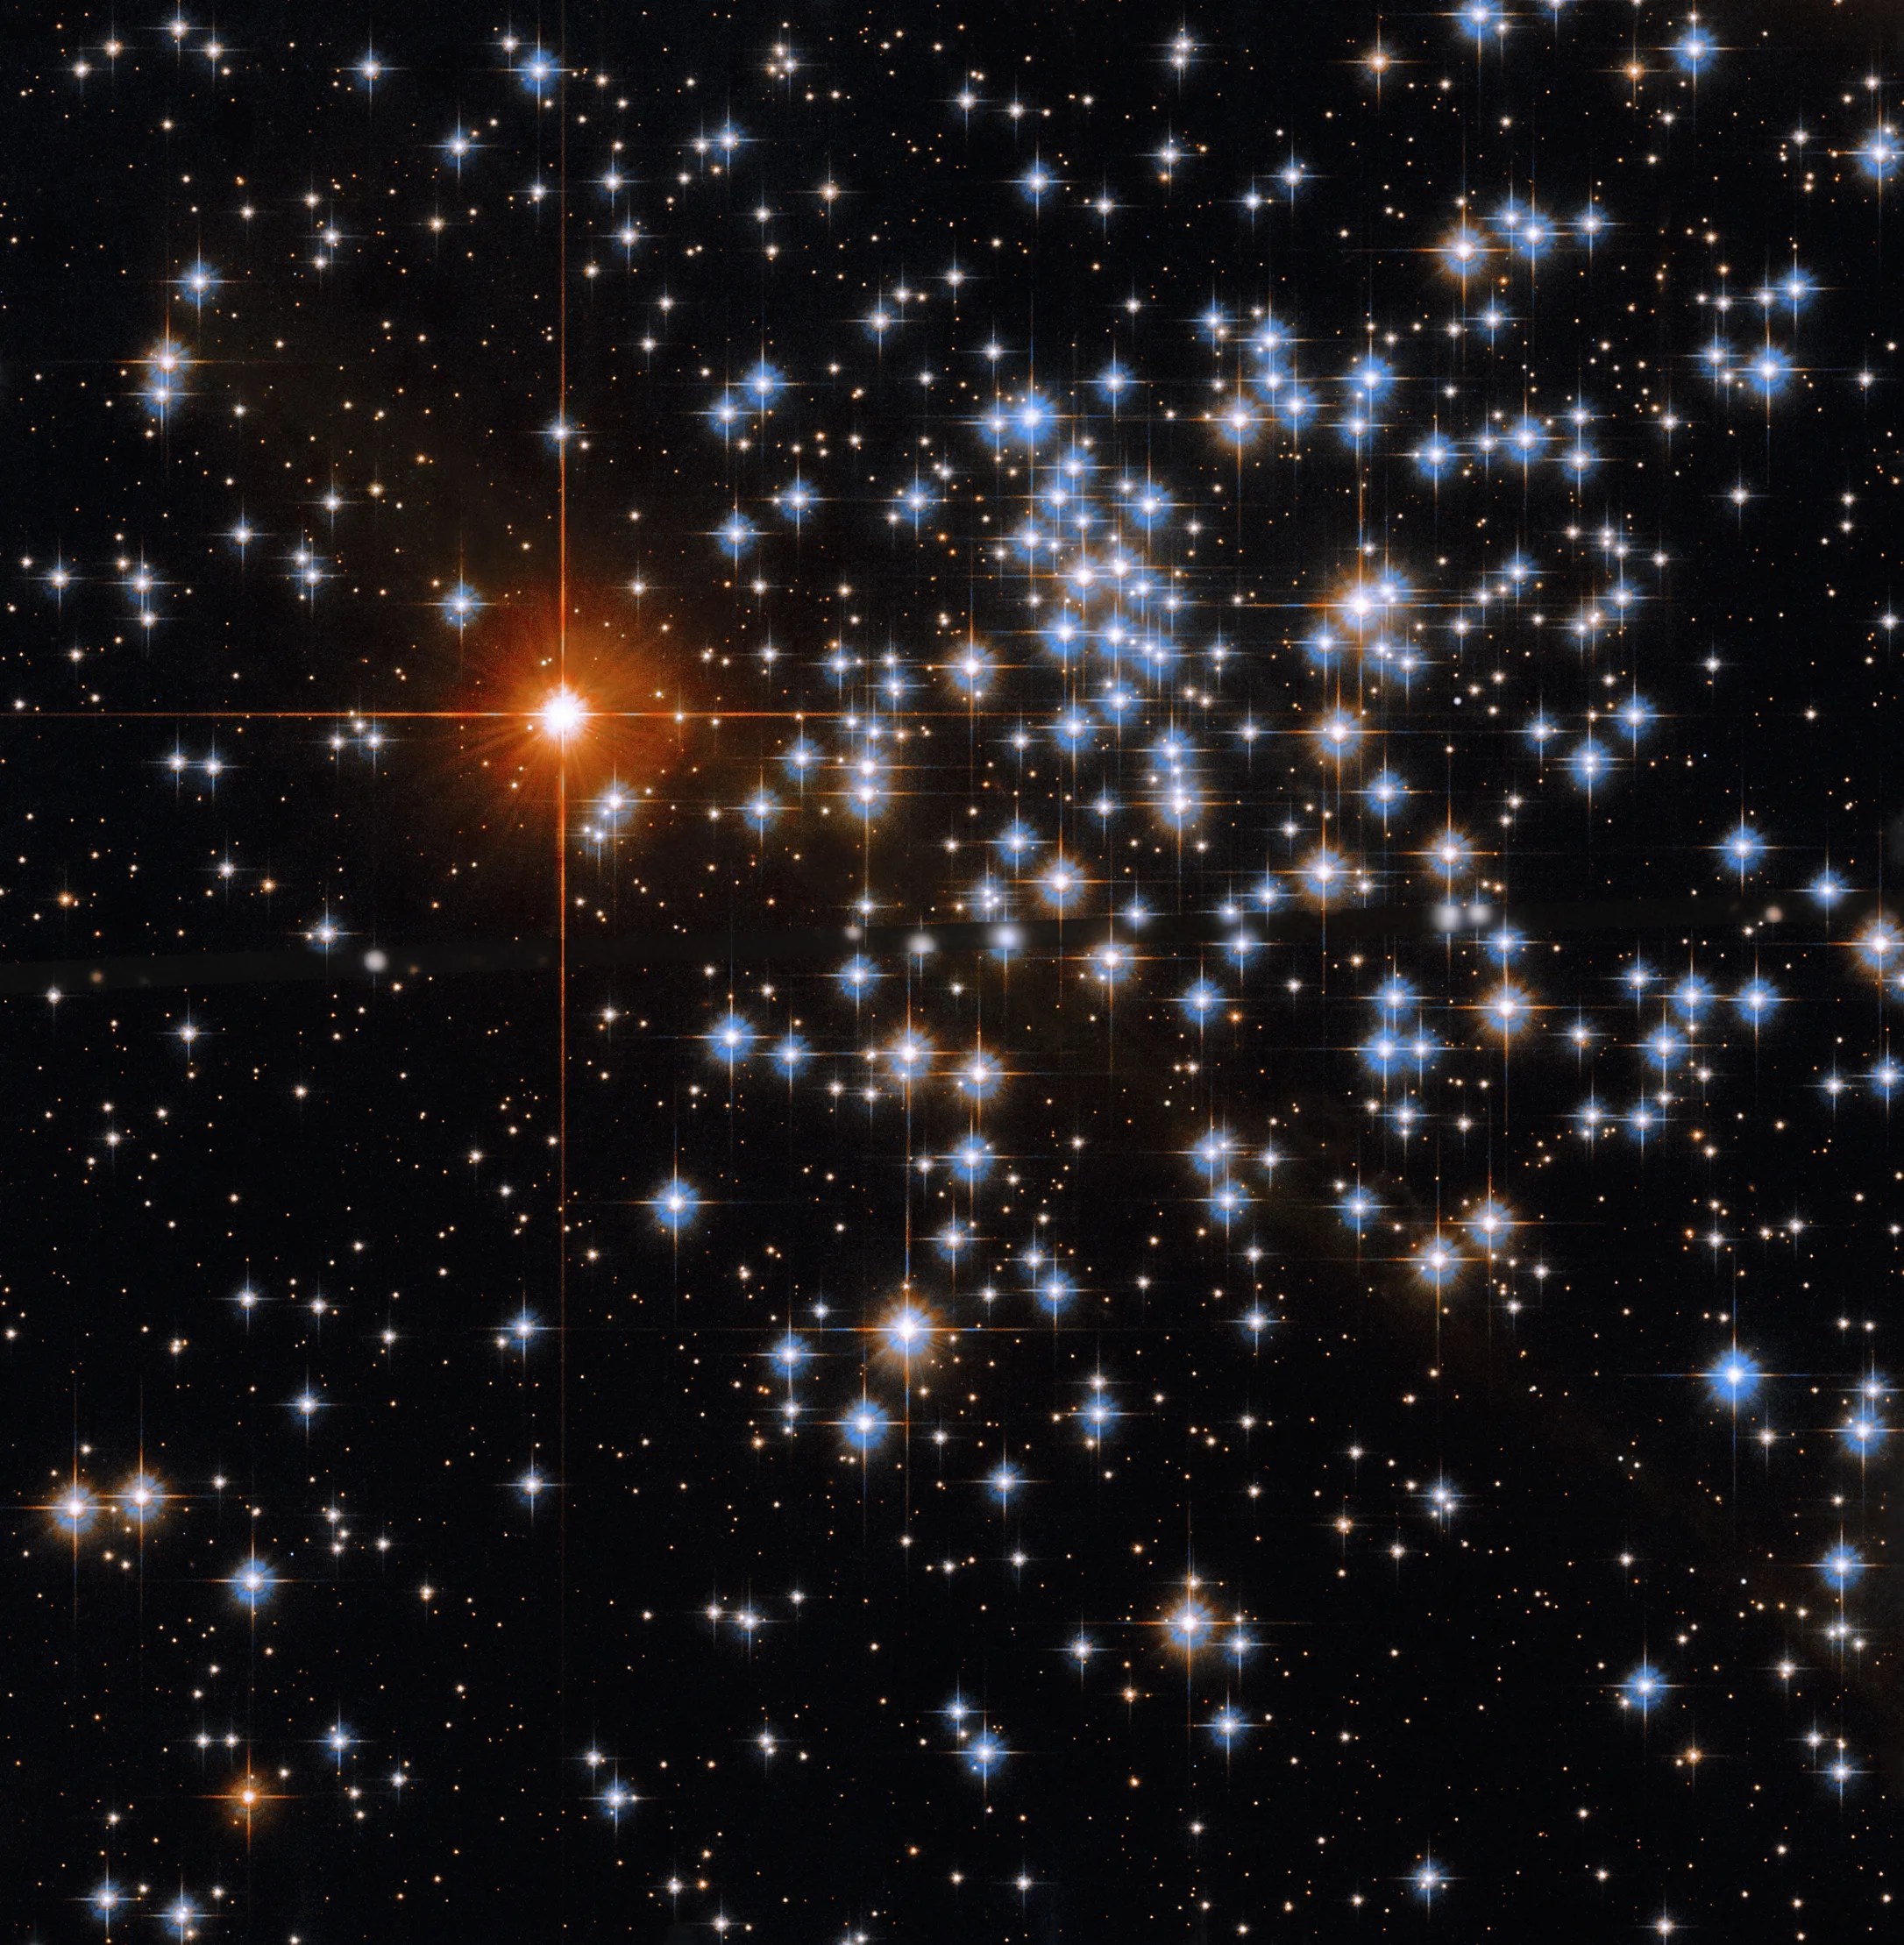 Bright blue-white stars fill the scene, but are concentrated on the right side of the image. a bright reddish-orange star sits in the upper left quadrant of the image near image center.